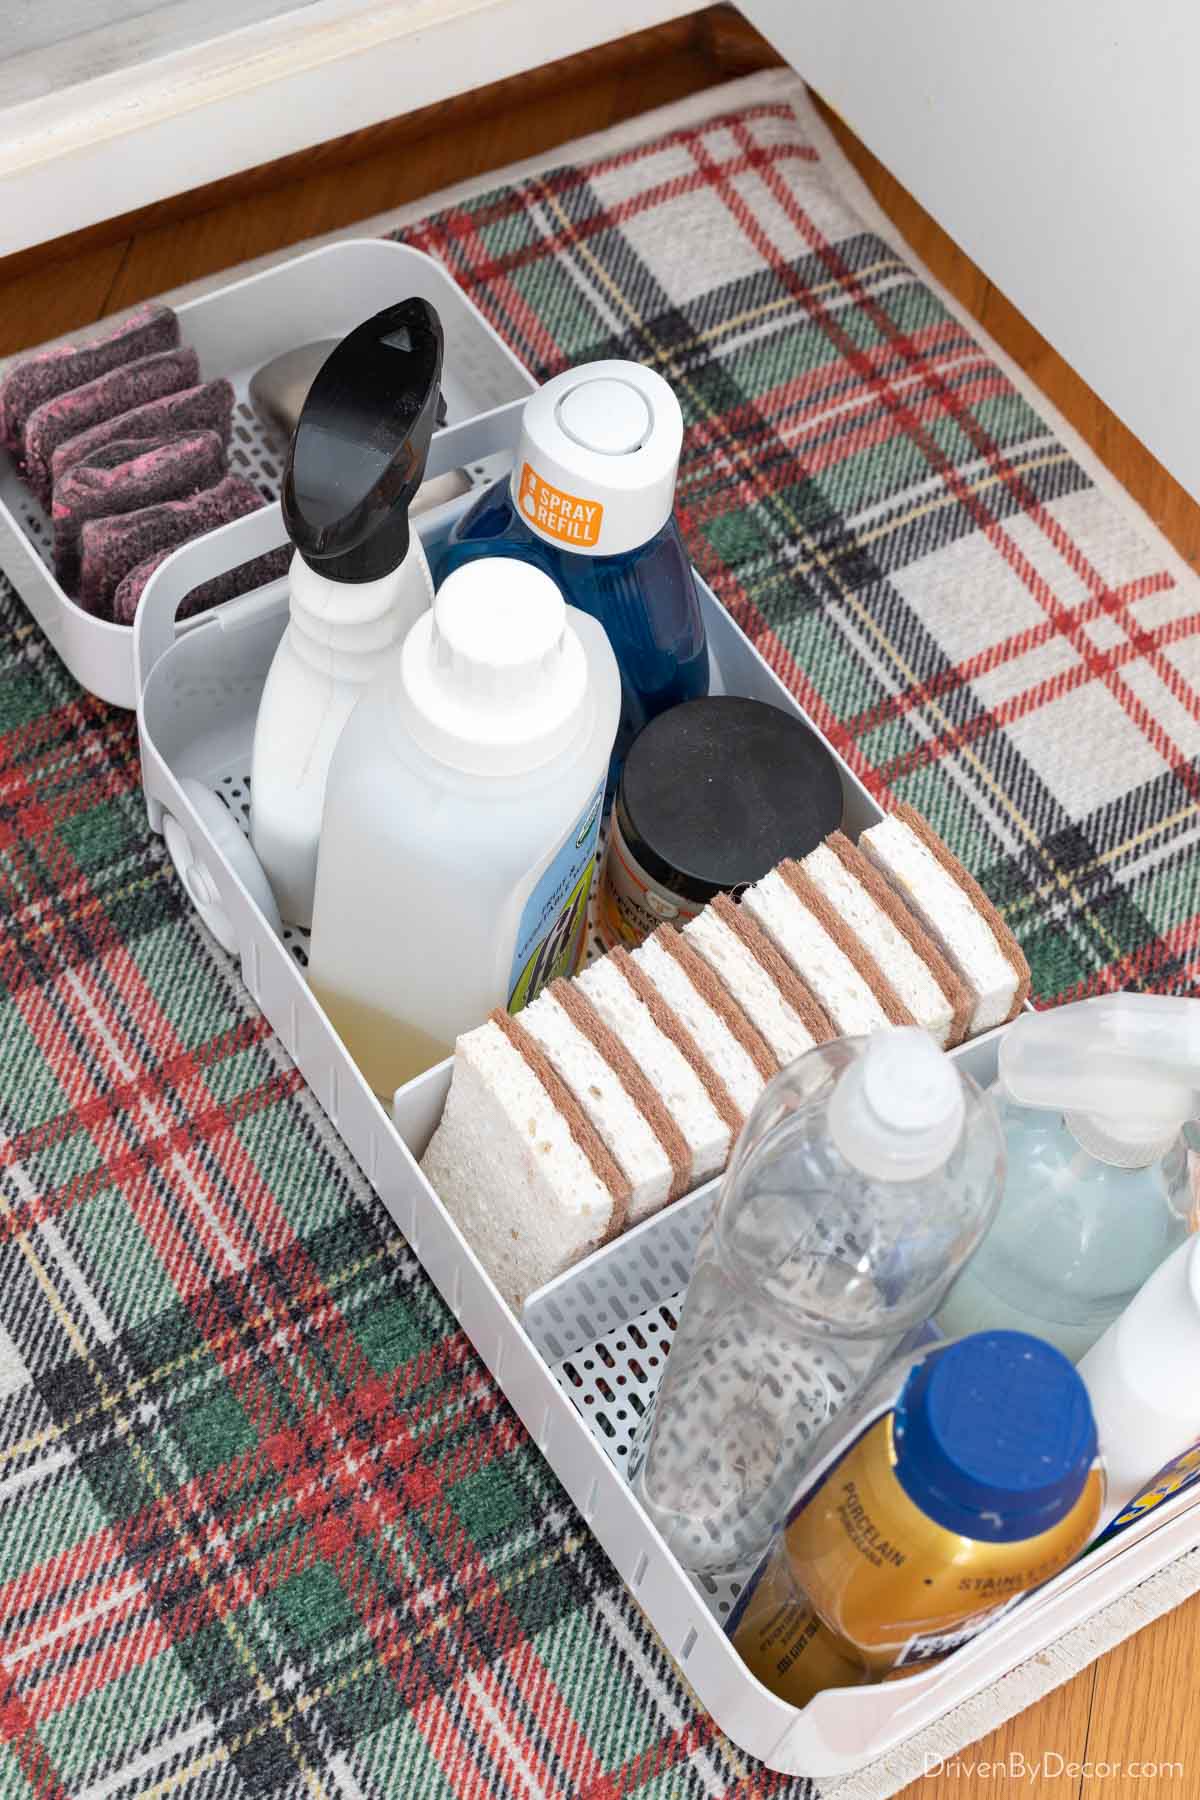 Top view of rolling organizer filled with kitchen products